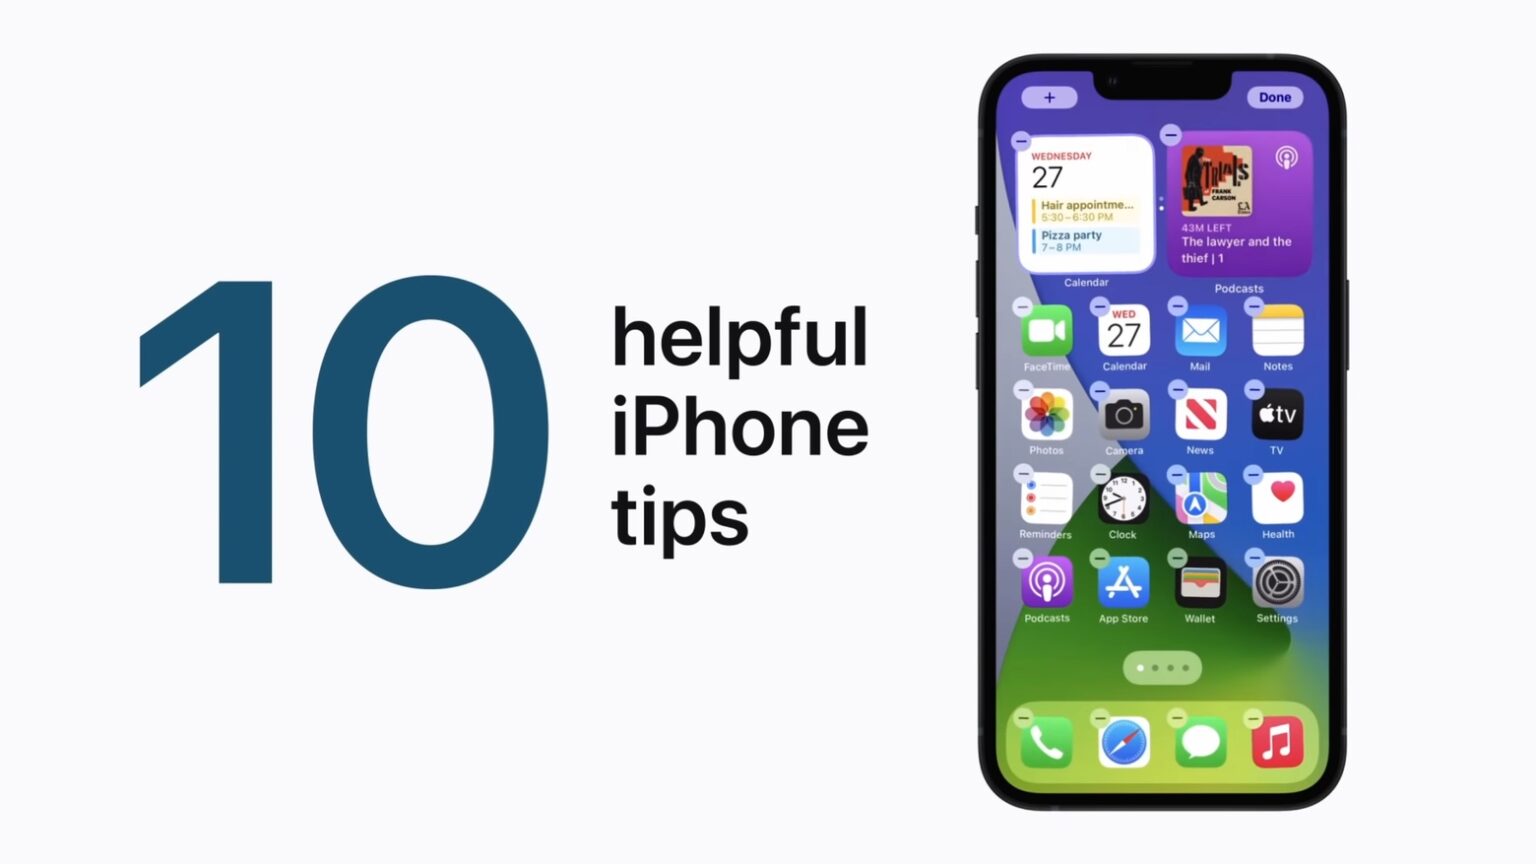 Get 10 useful iPhone tips and tricks straight from Apple